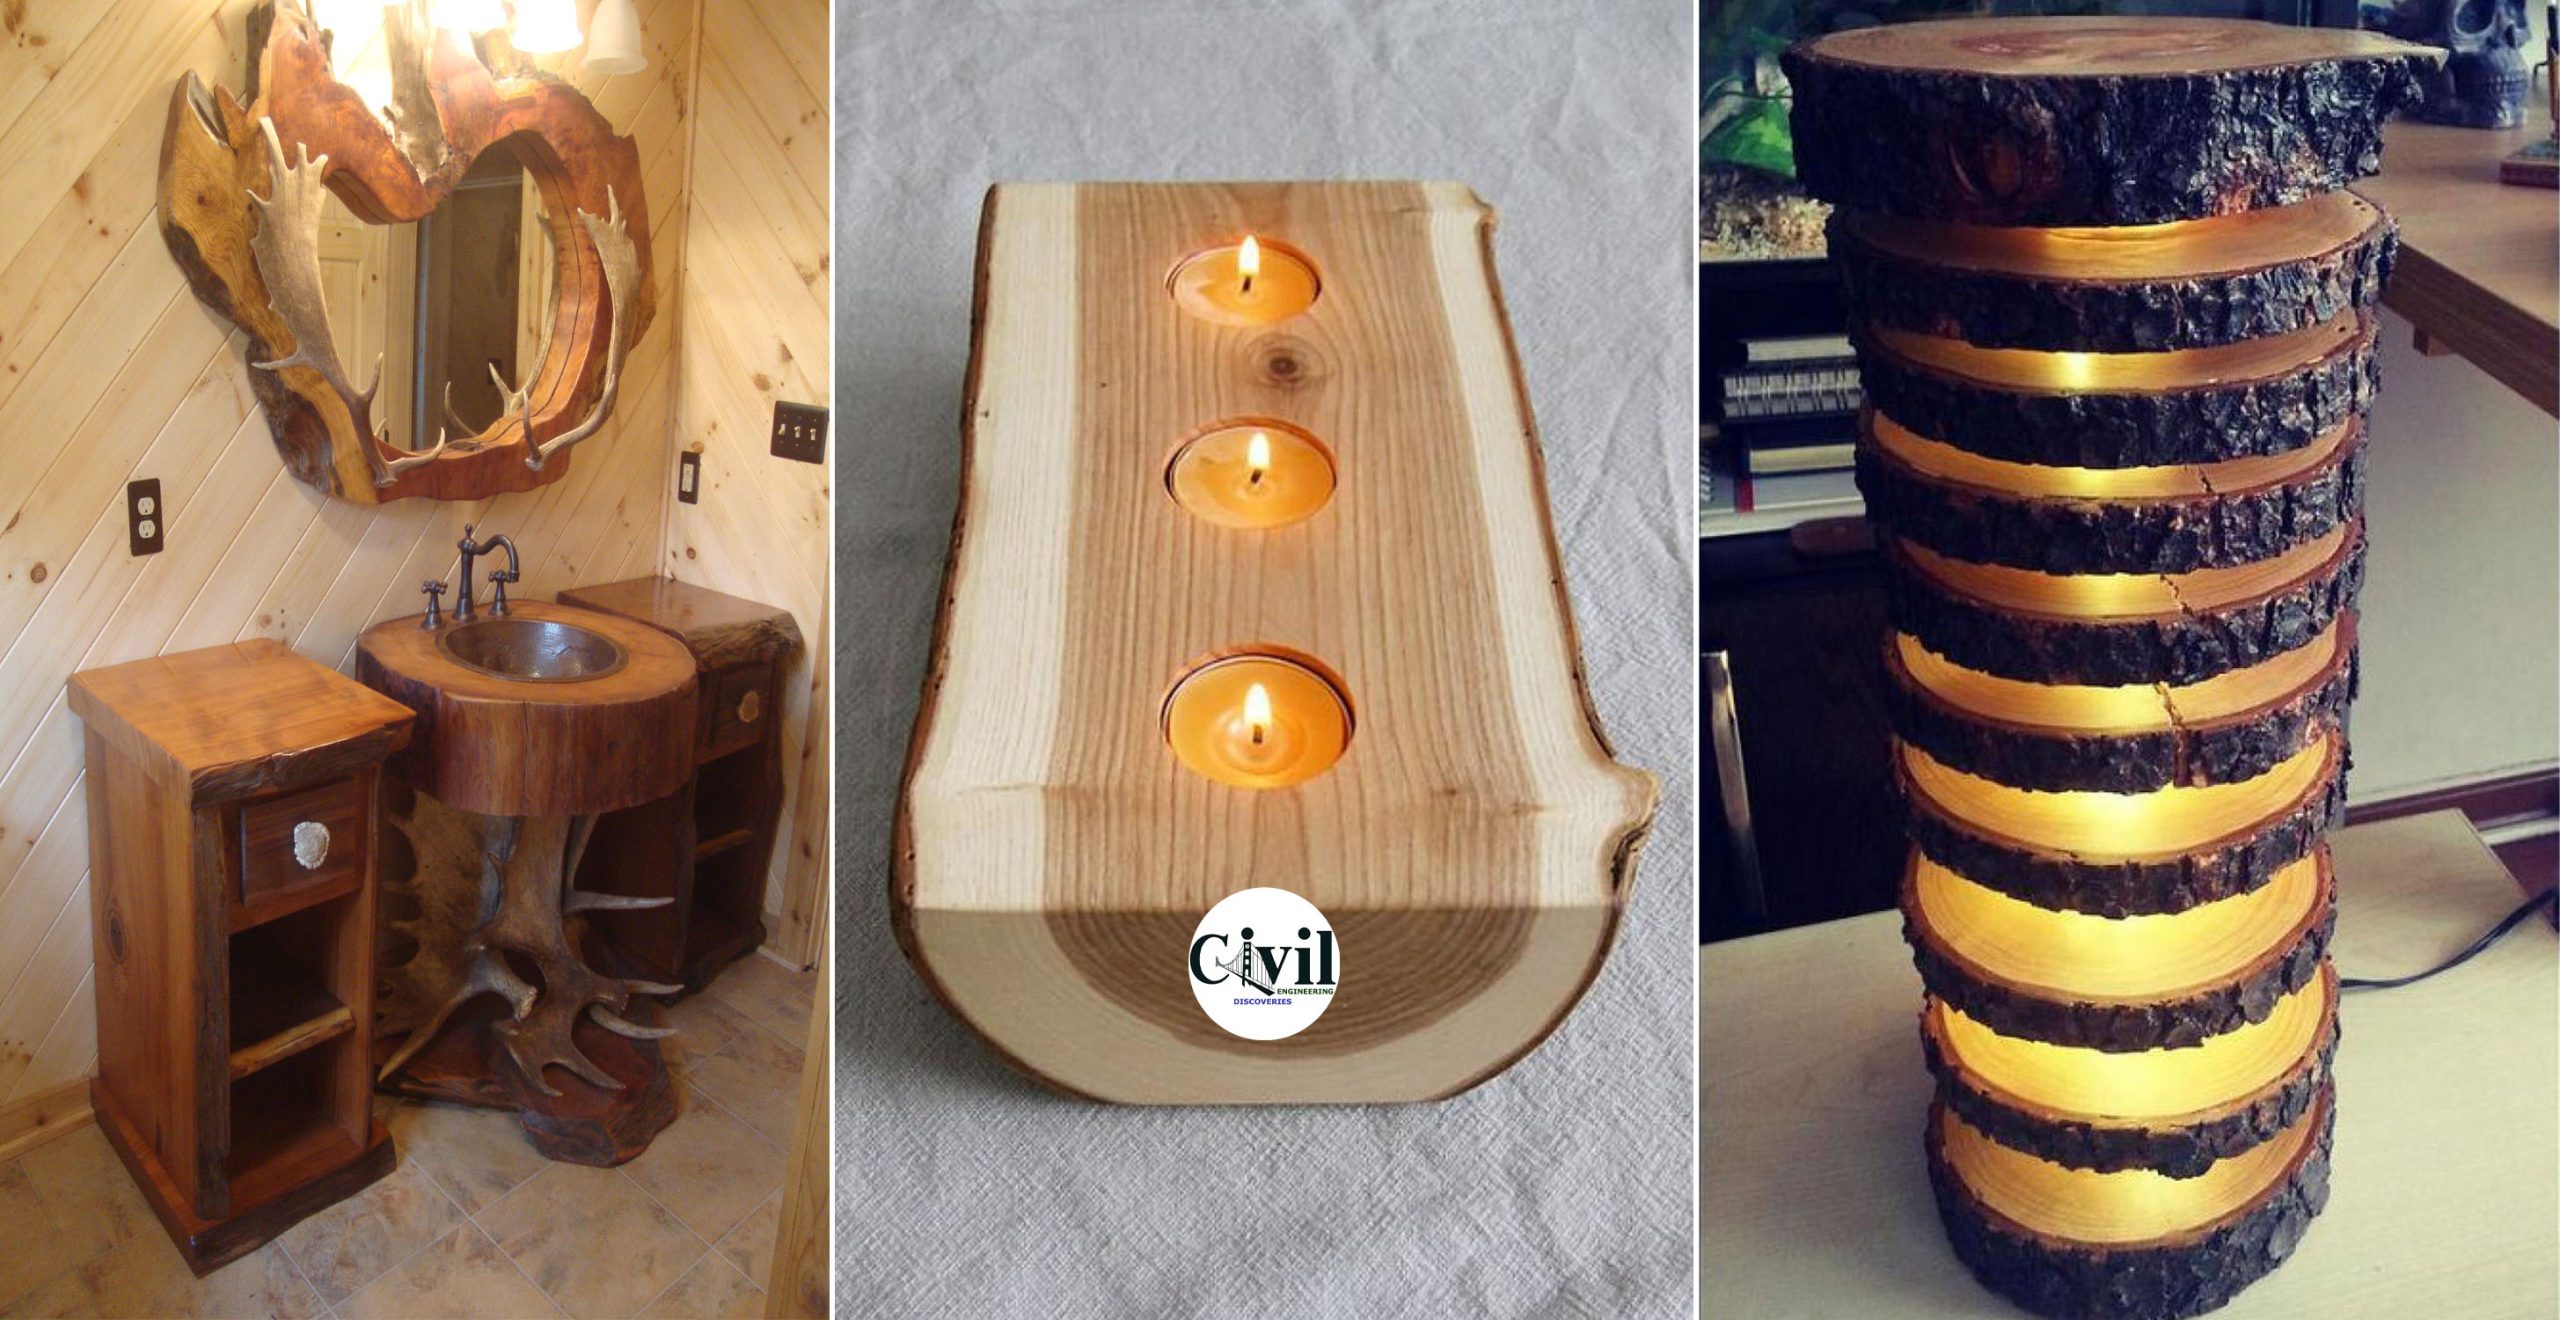 30 Wooden Decorations To Make your Home Feel Cozier